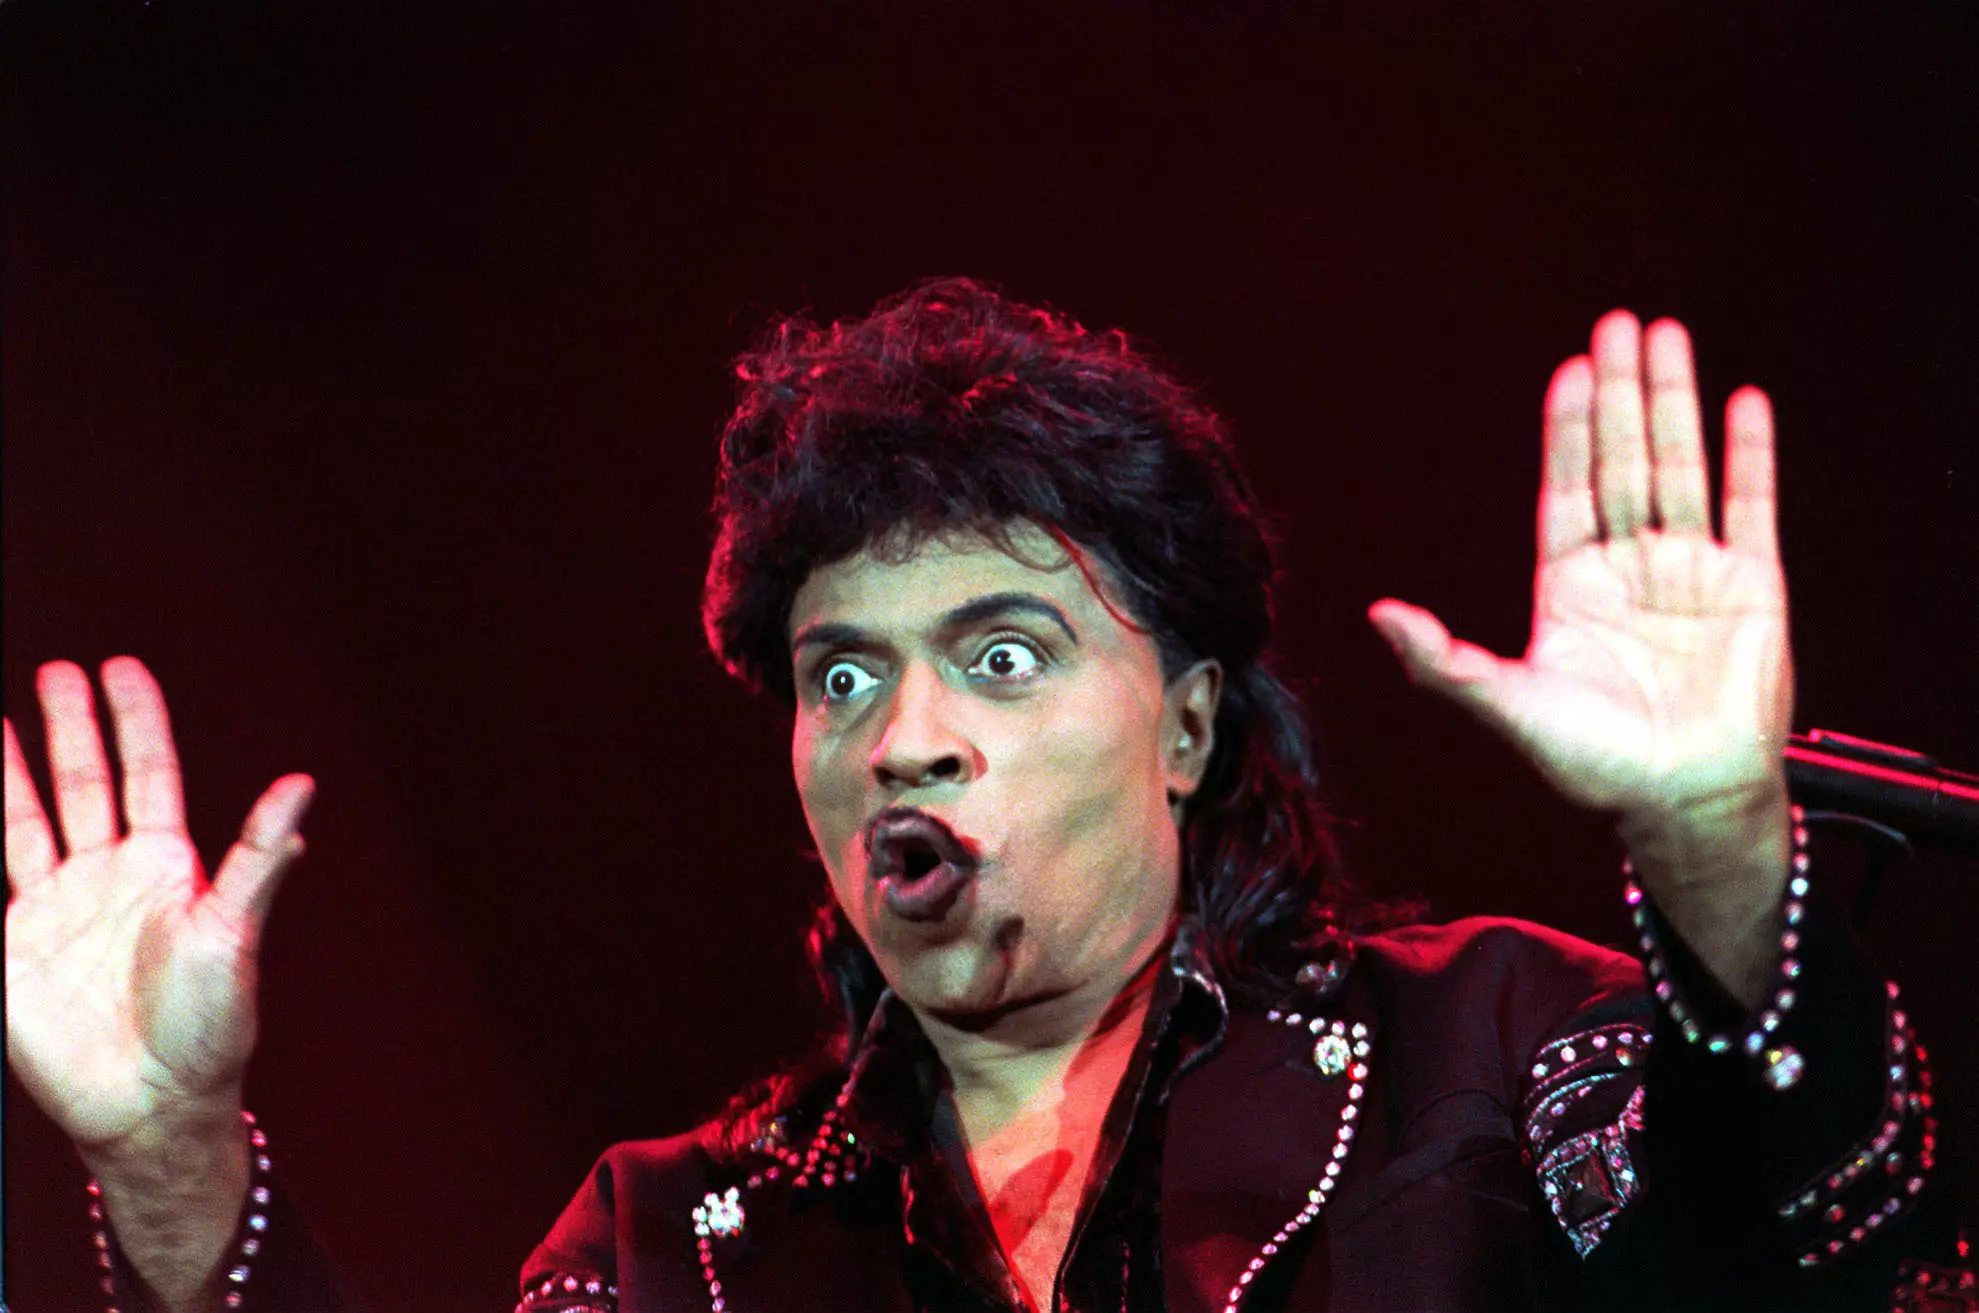 Little Richard performing on stage during the Legends of Rock 'n' Roll one-off concert held at the London Arena.